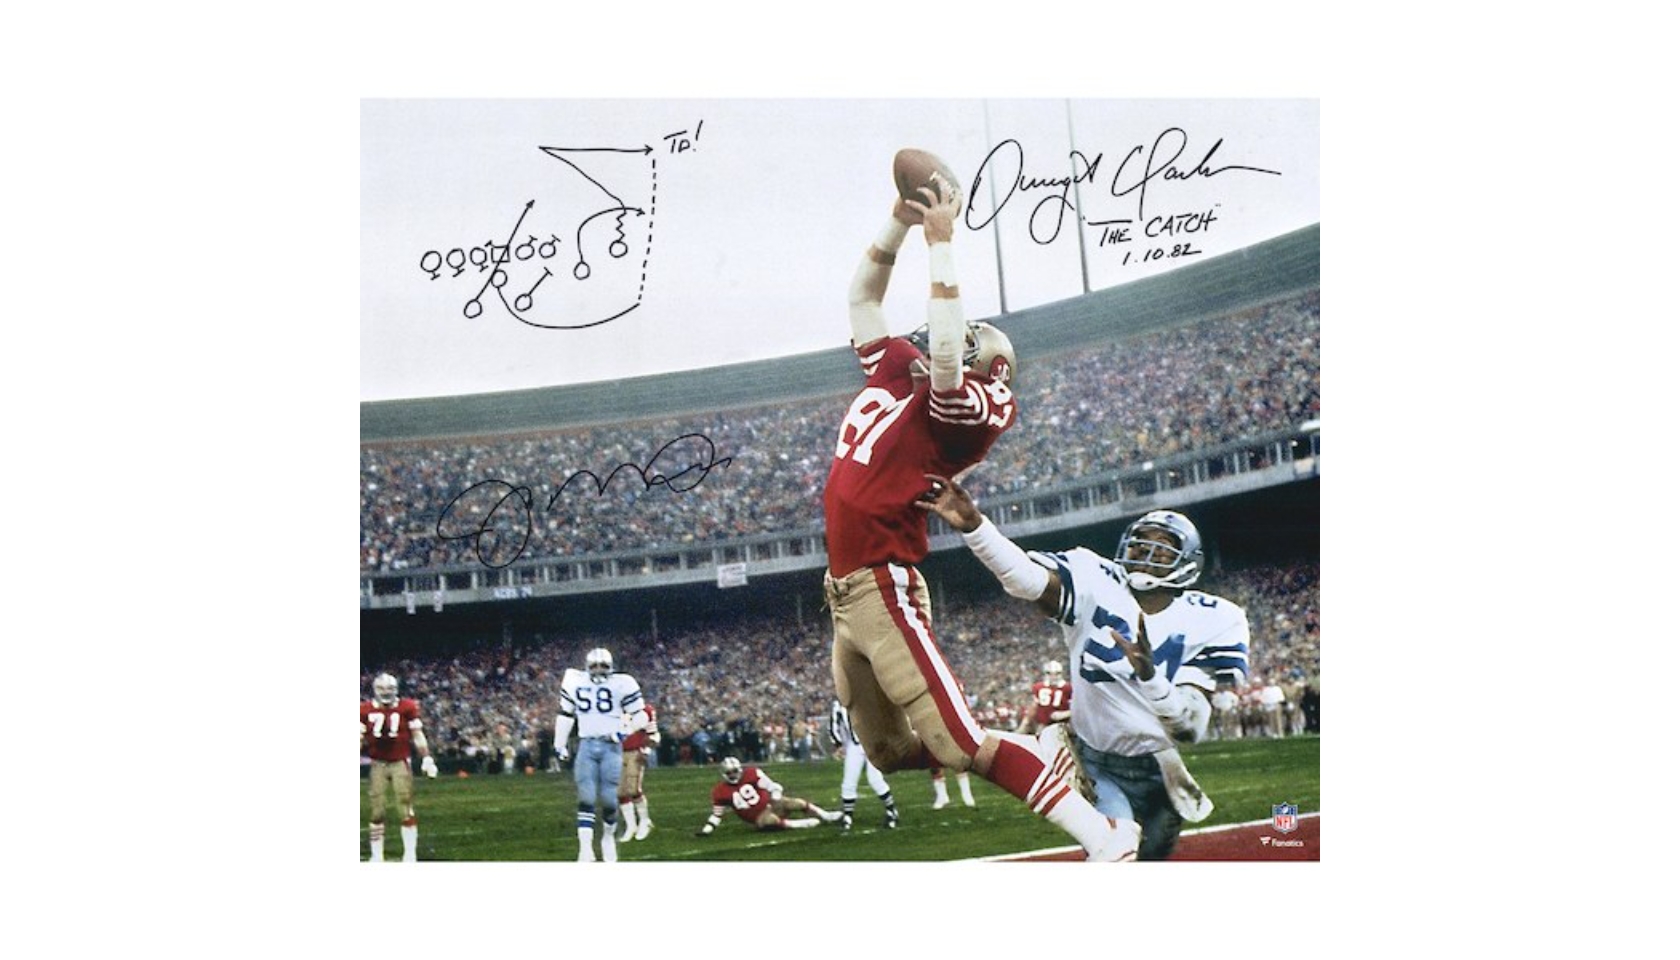 Dwight Clark Hand Signed ' The Catch' Photograph - CharityStars